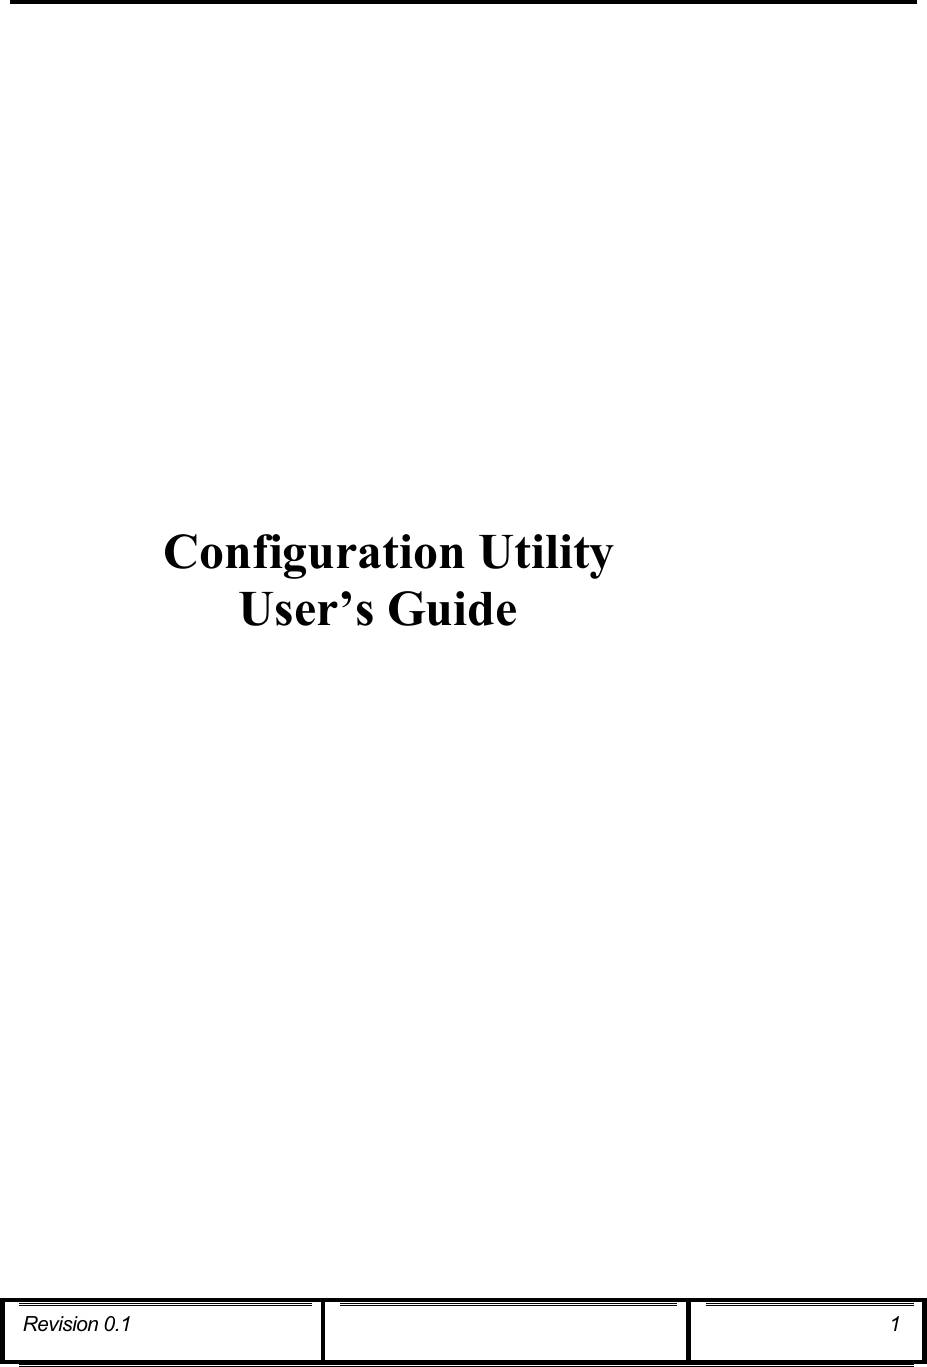                  Configuration Utility  User’s Guide Revision 0.1  1      